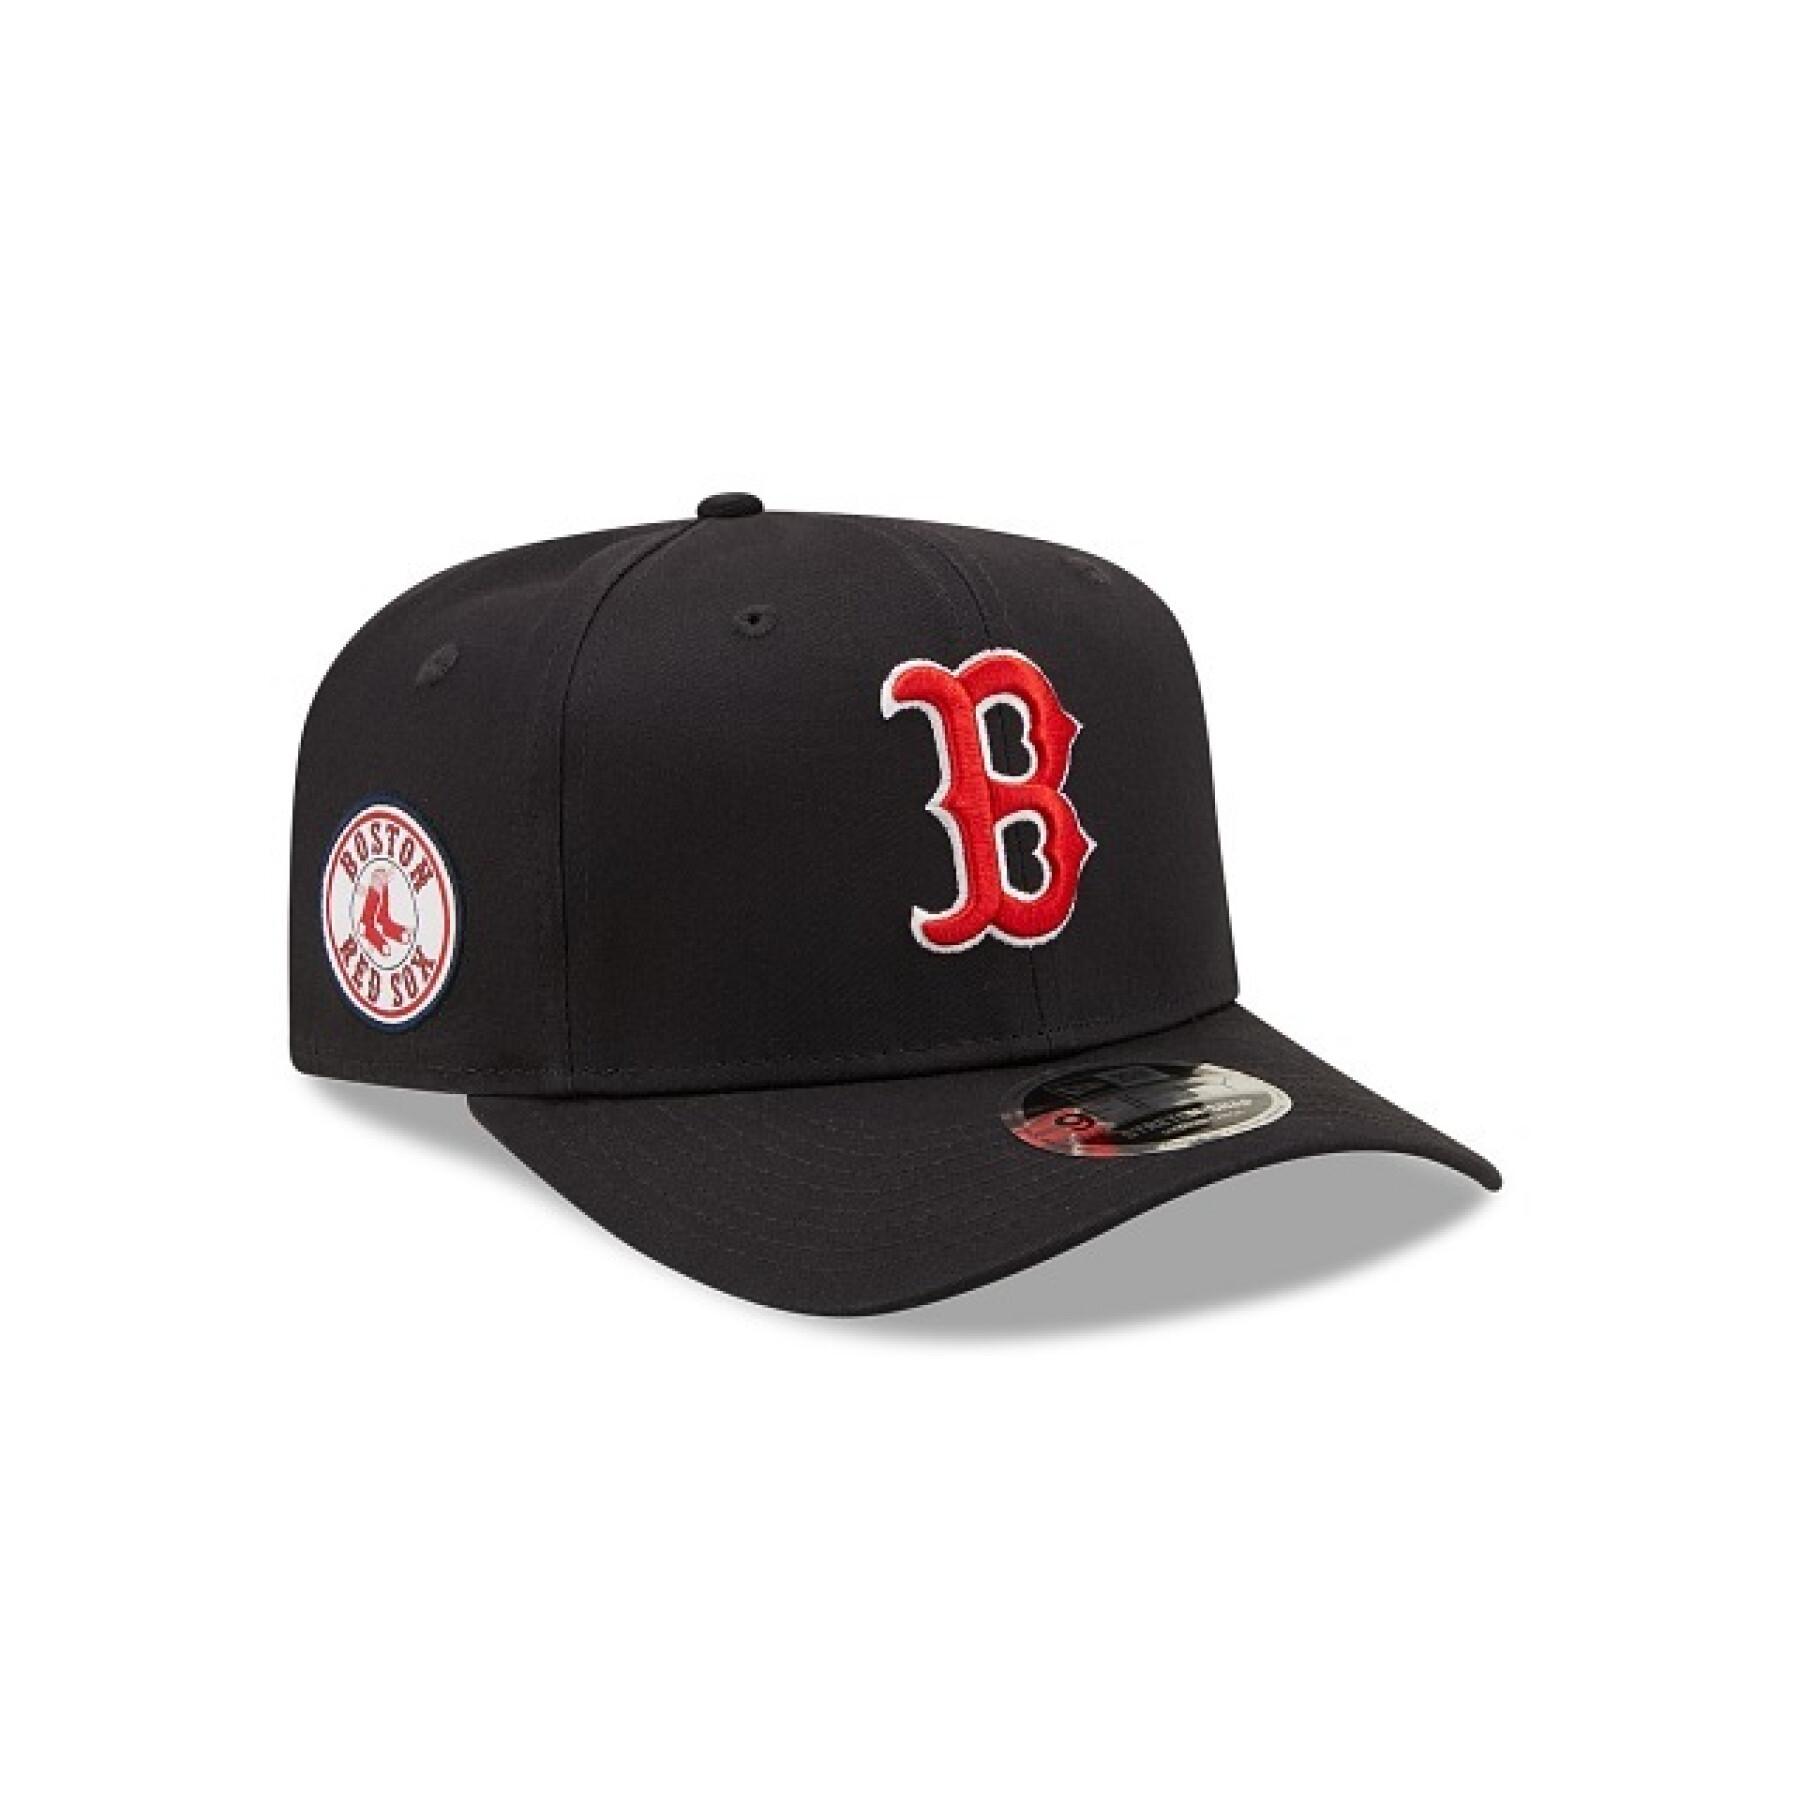 Kappe 9FIFTY Boston Red Sox